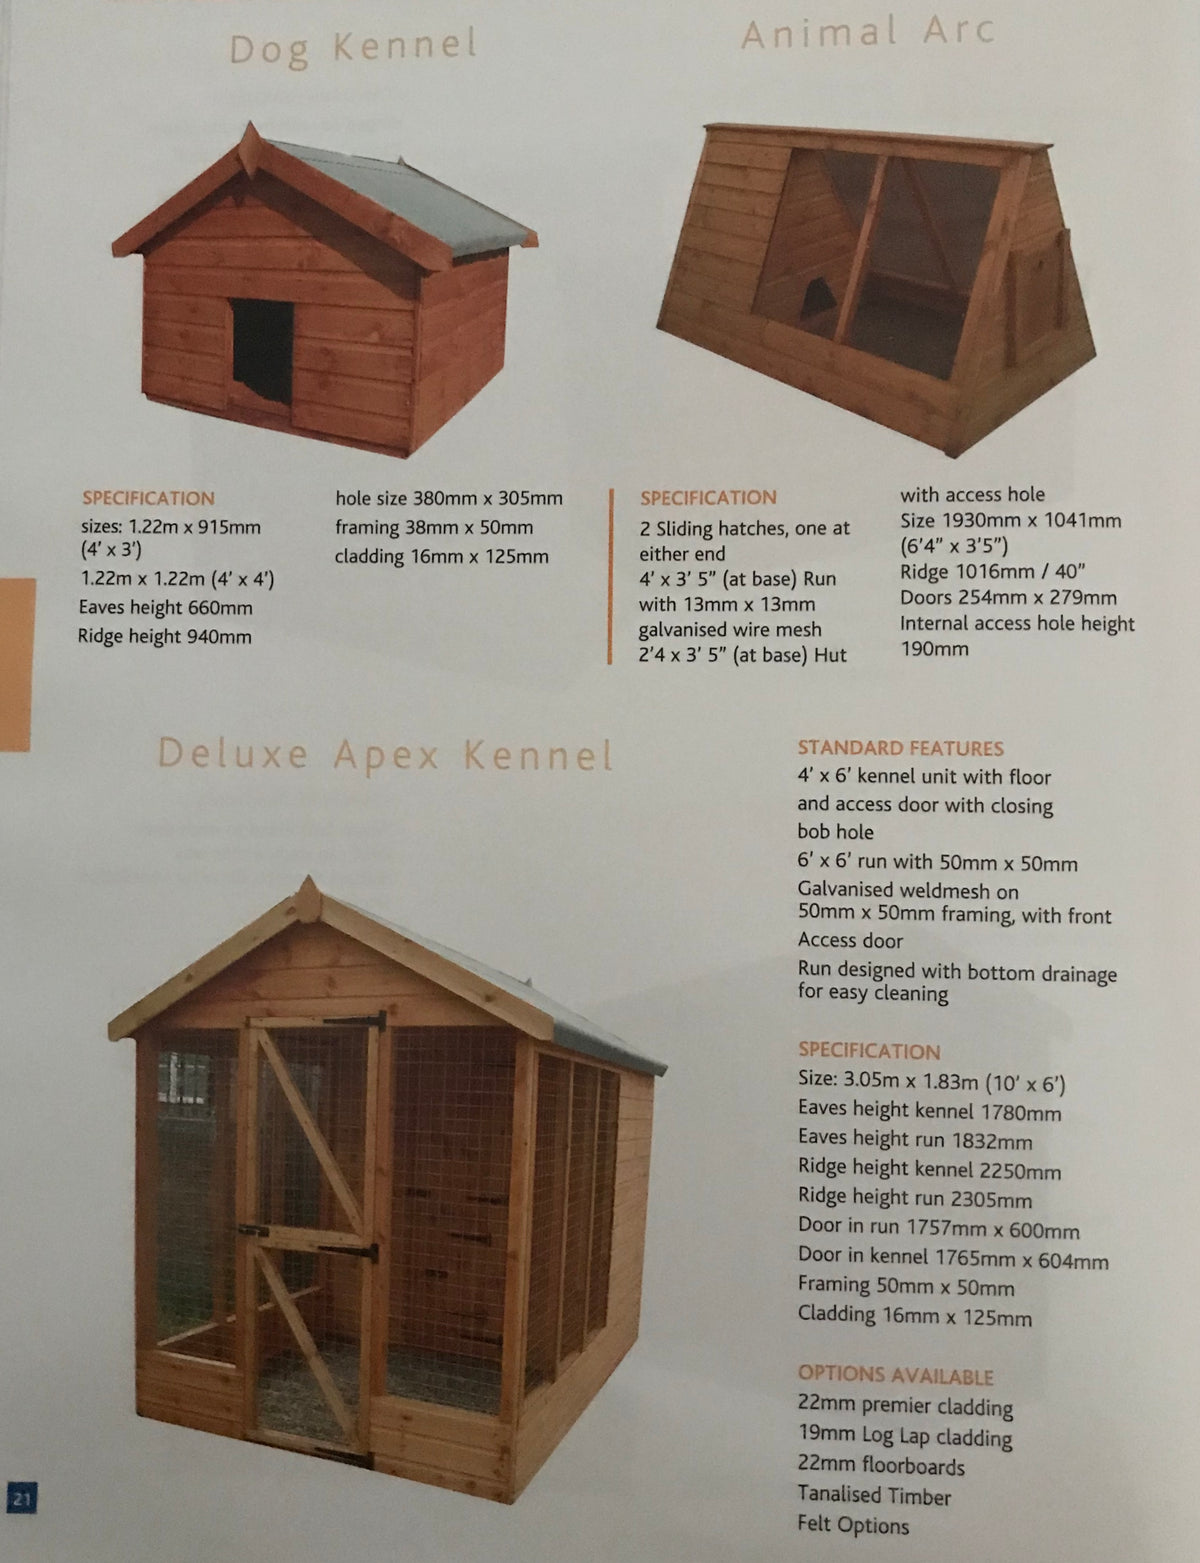 Dog Kennel, Animal Arc & Deluxe Apex Kennel